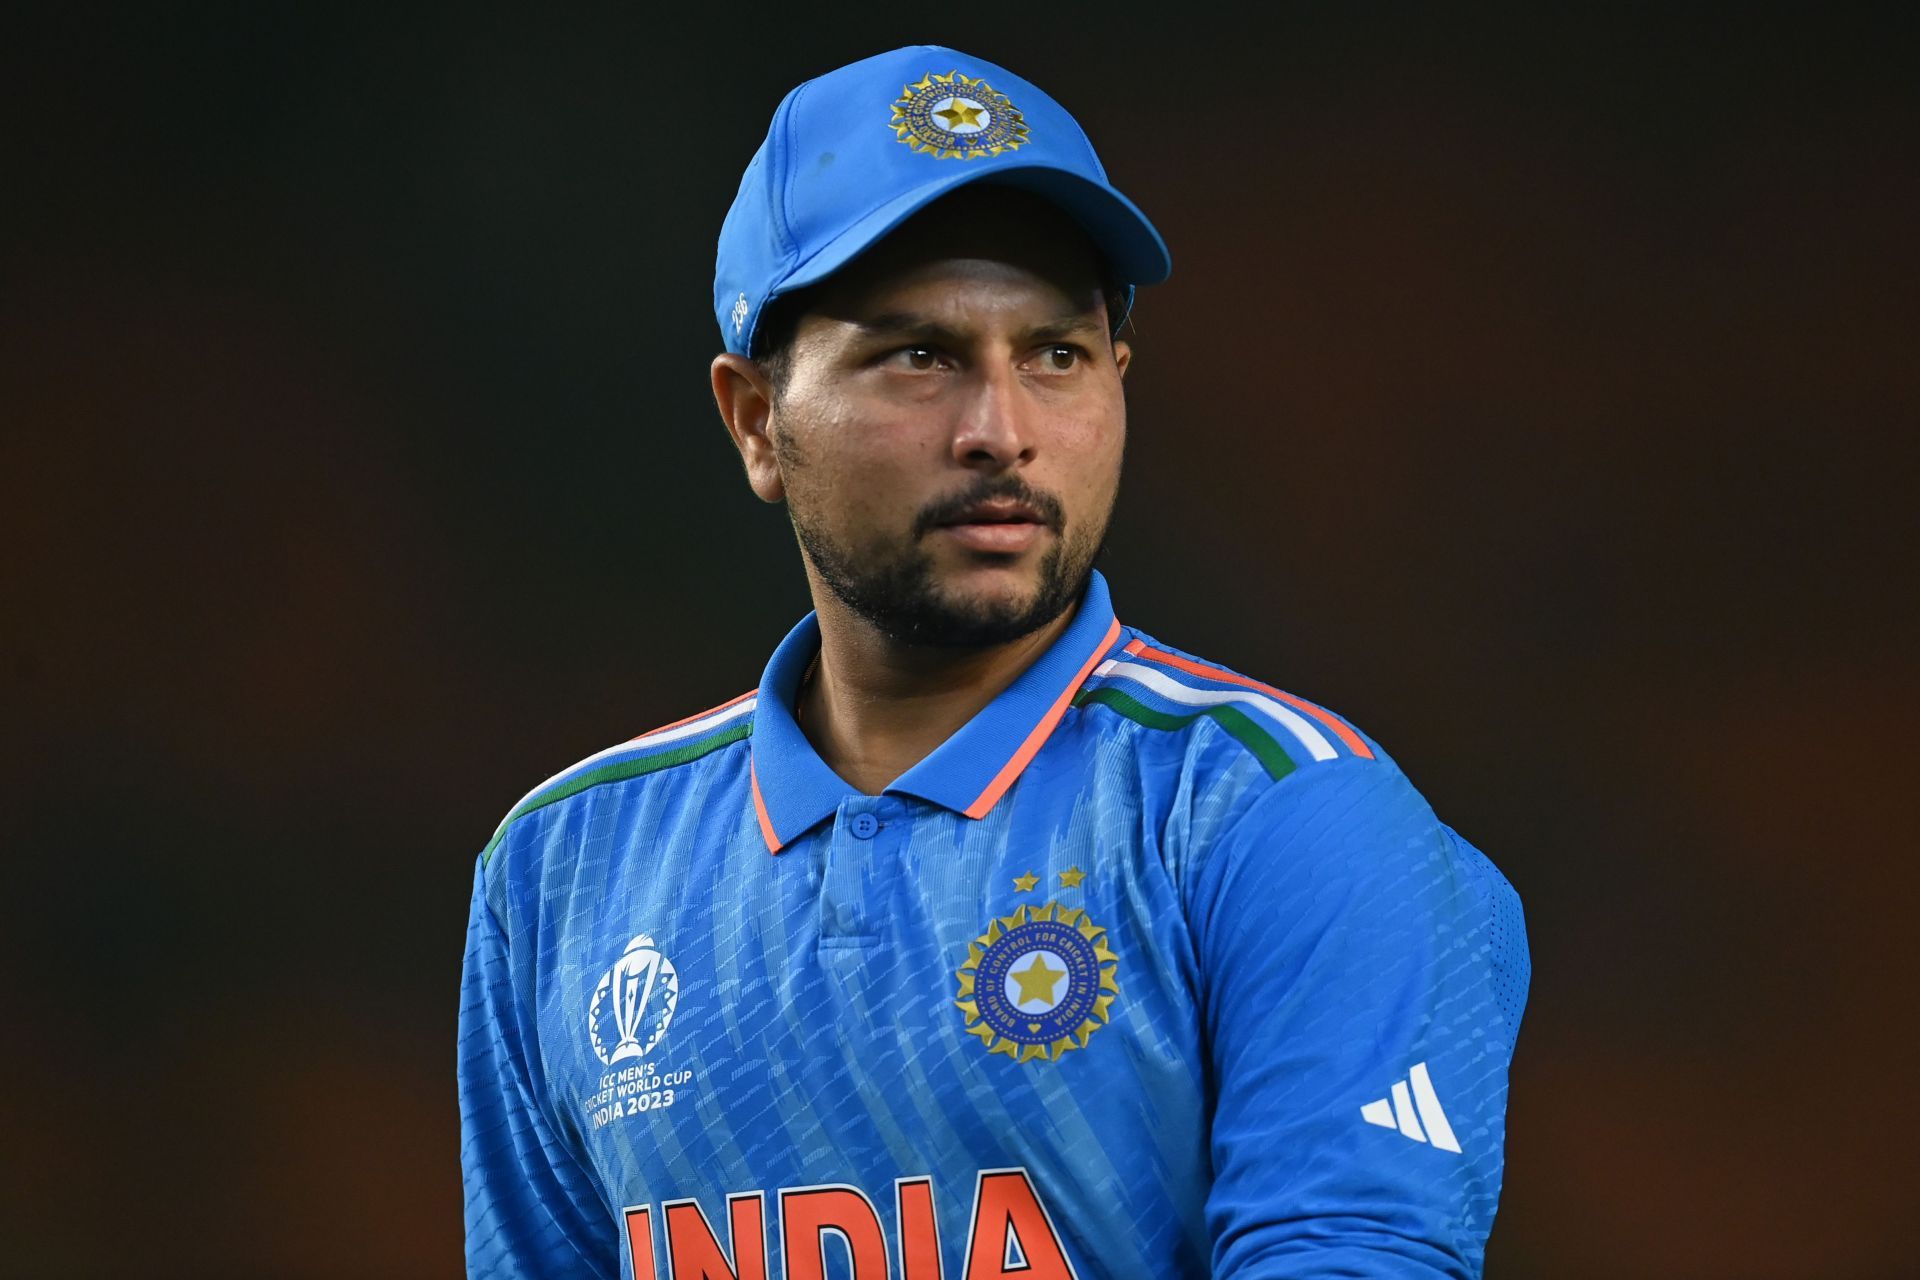 Kuldeep Yadav has been warming the bench for the last two T20Is